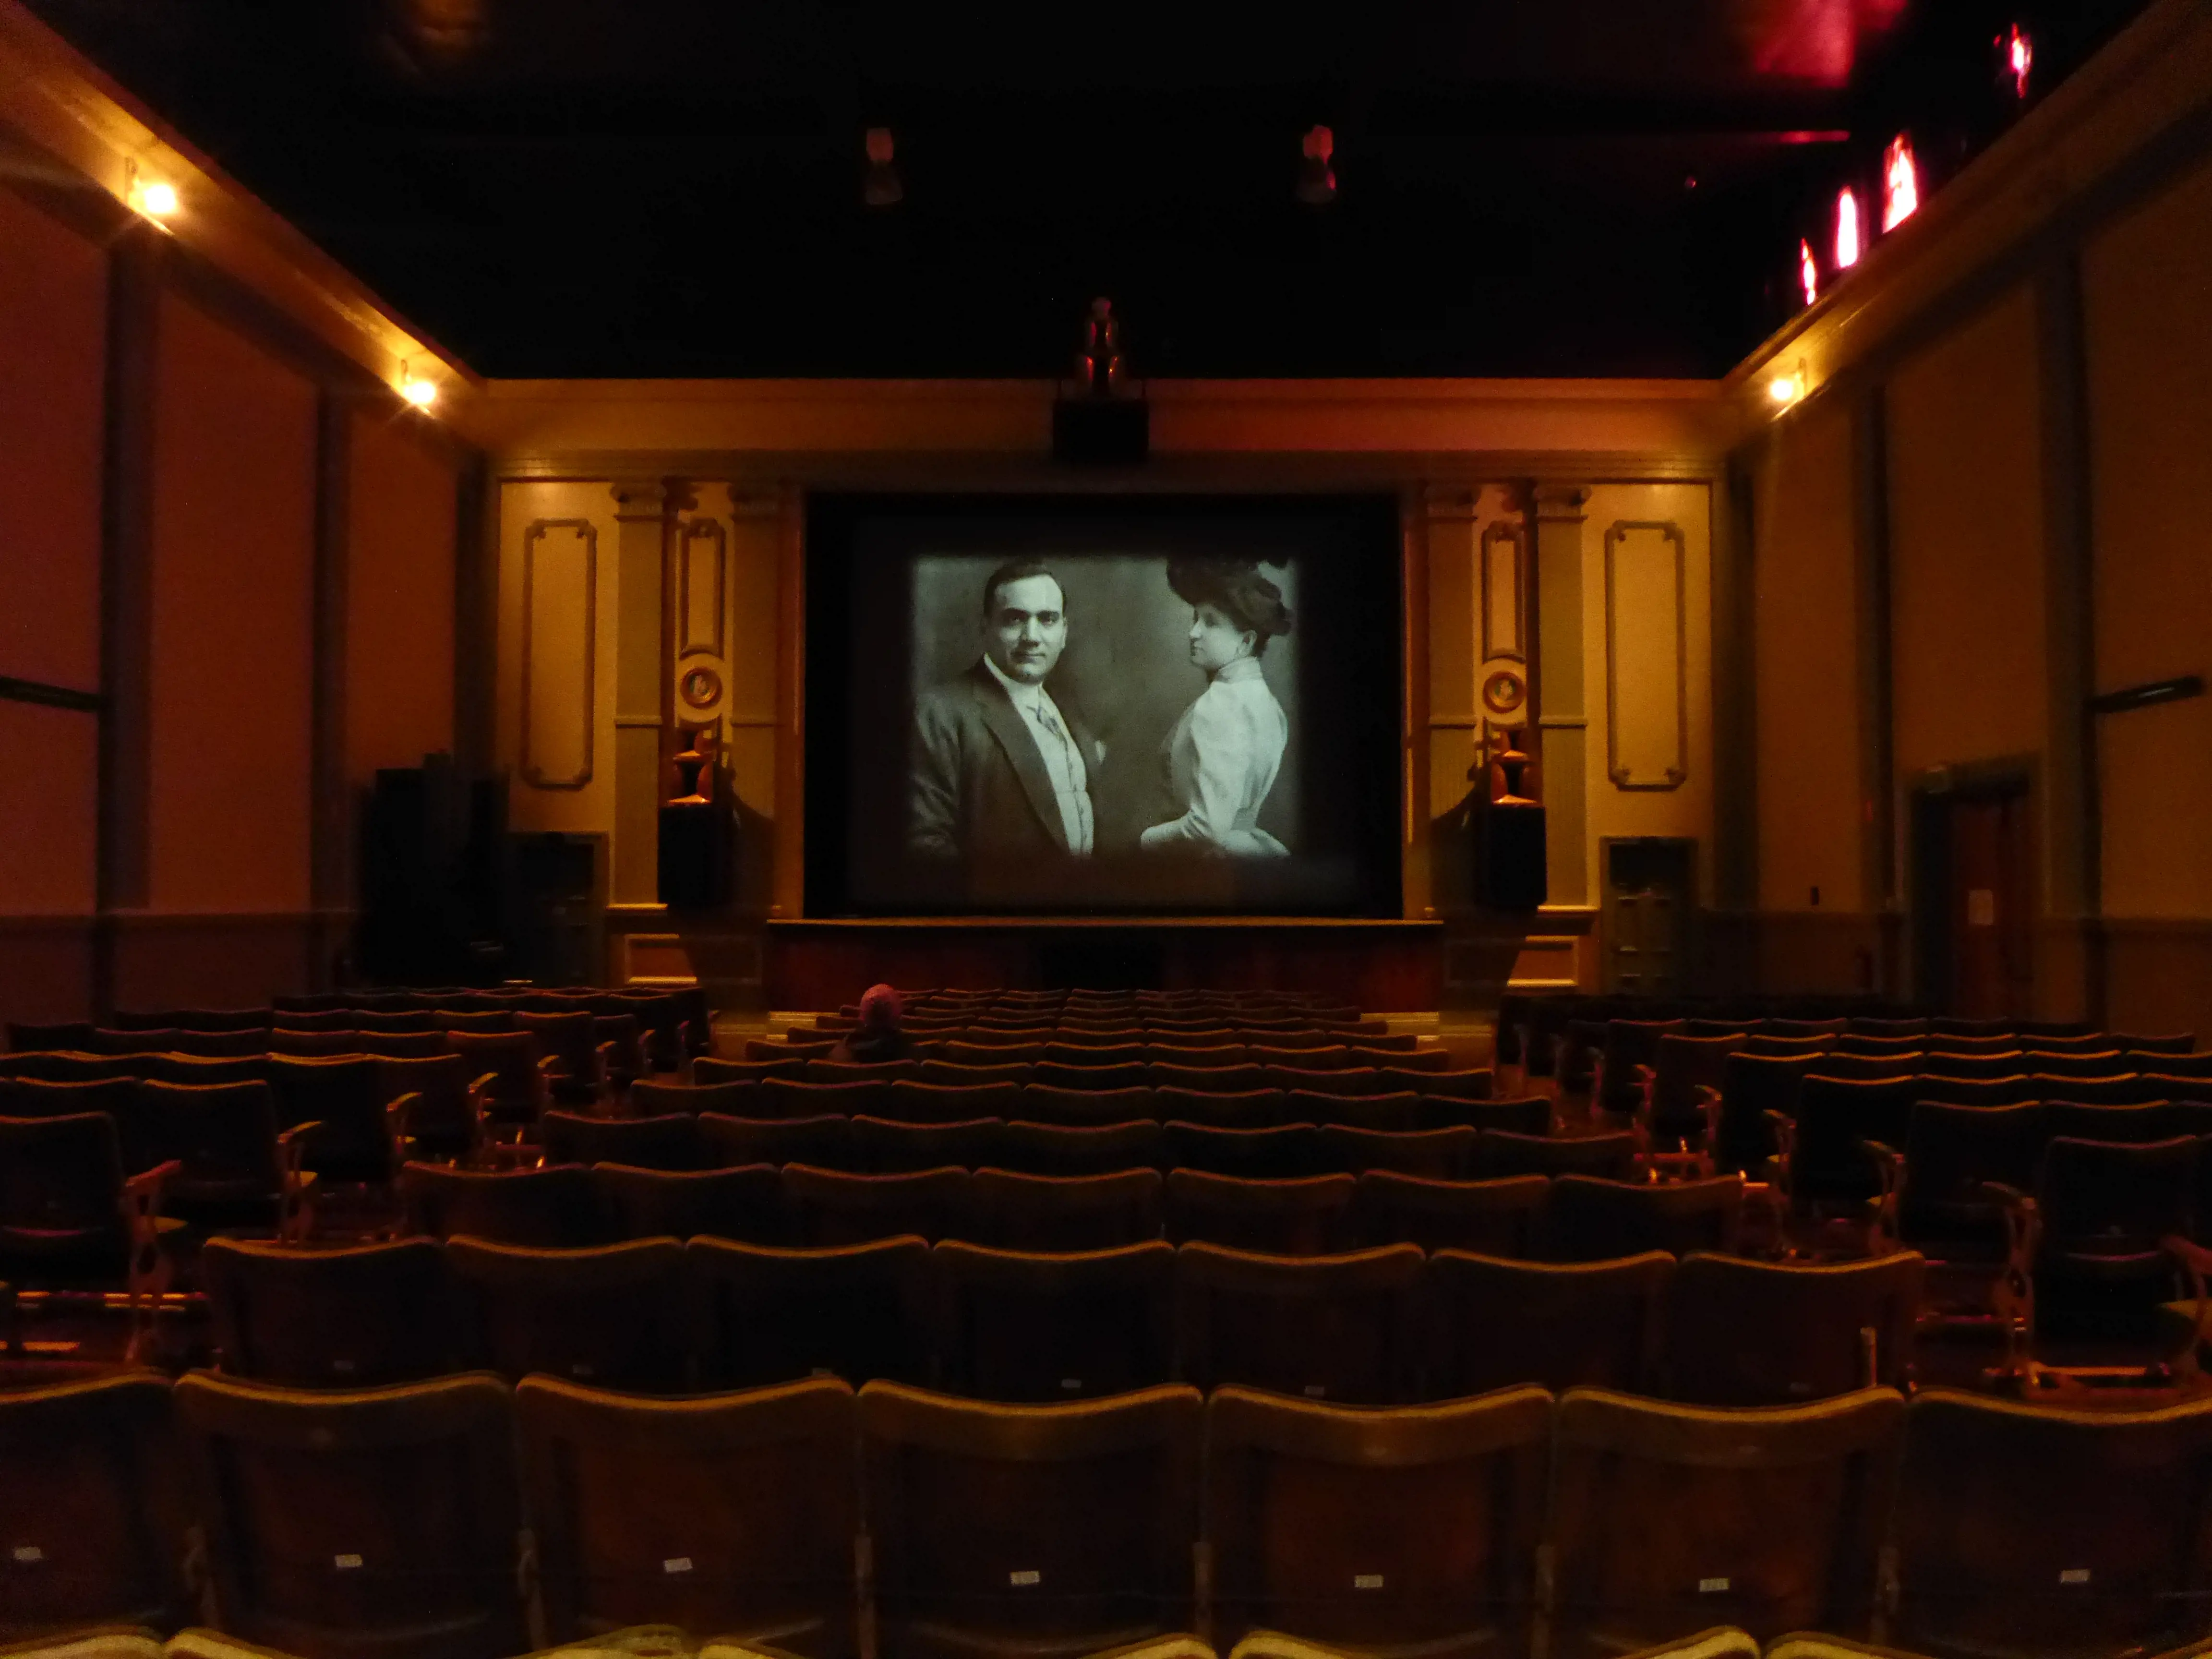 A black and white film plays in a warmly lit art-deco style theatre with high back, red velvet seating in rows.